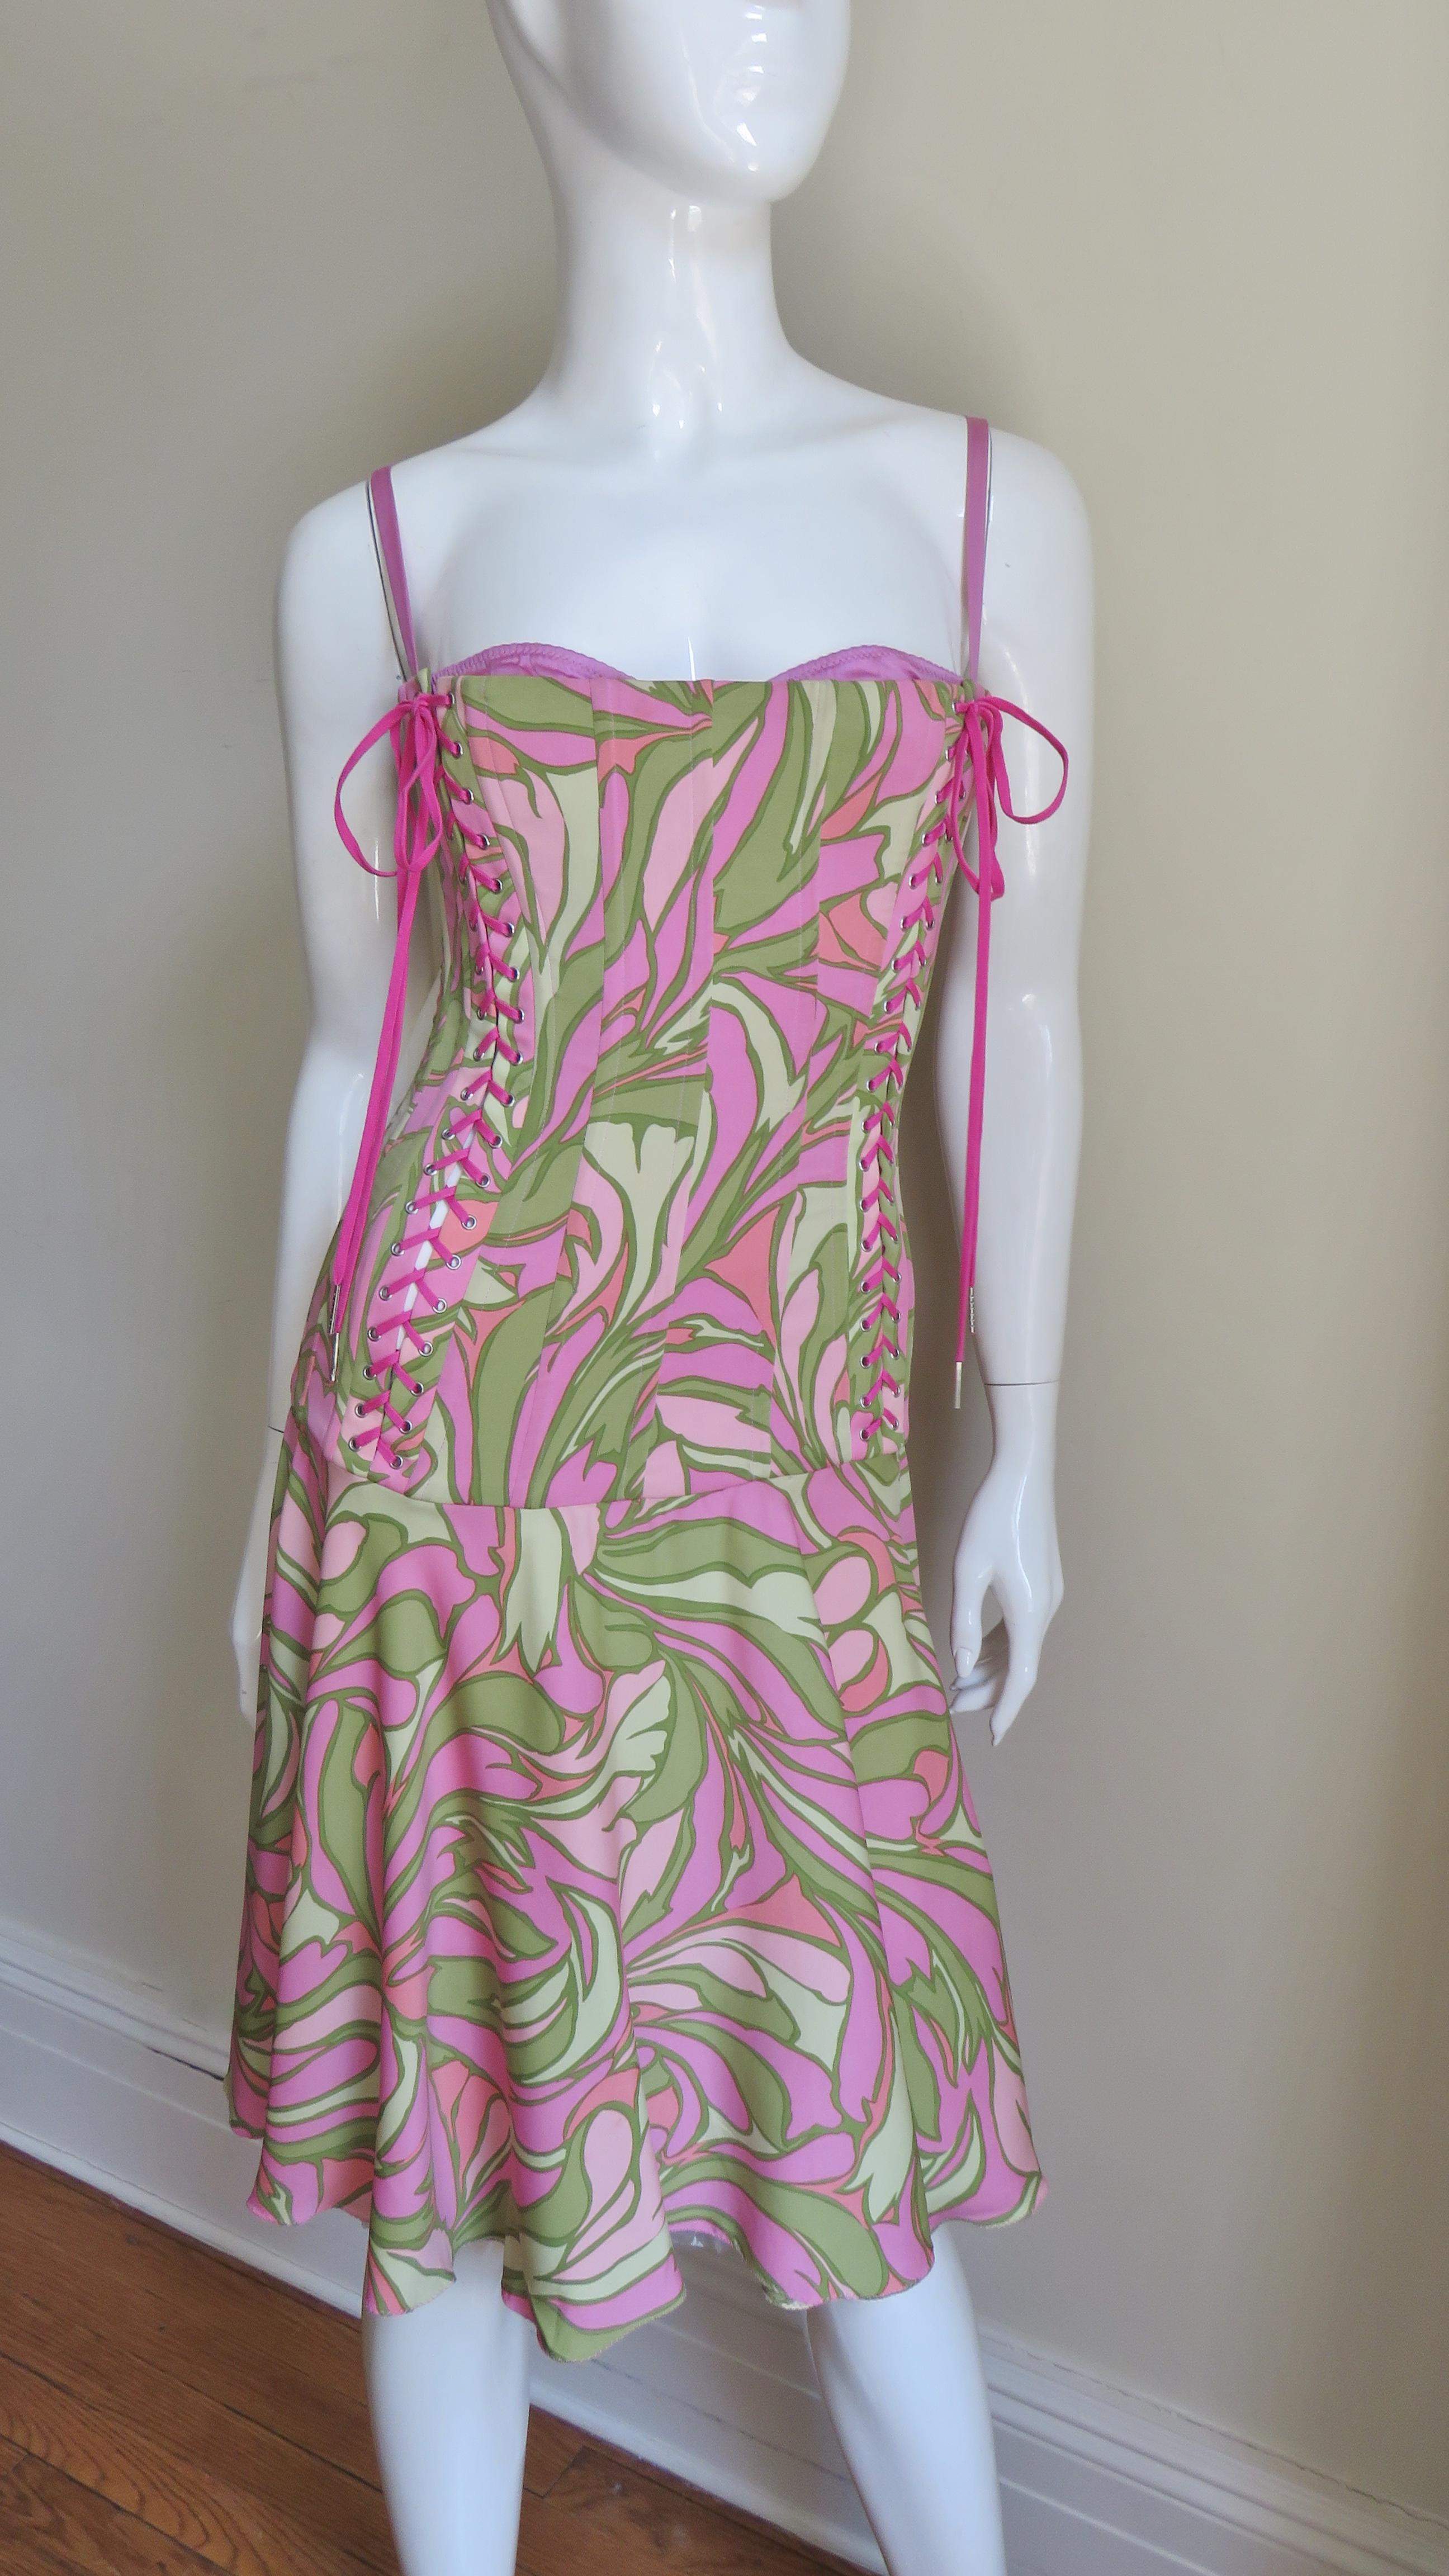 A beautiful pinks and greens geometric stretch silk print dress from Dolce & Gabbana.  It is fitted through the dropped waist torso and boned vertically throughout.  There is an attached matching pink fully adjustable bra which peeks out of the top